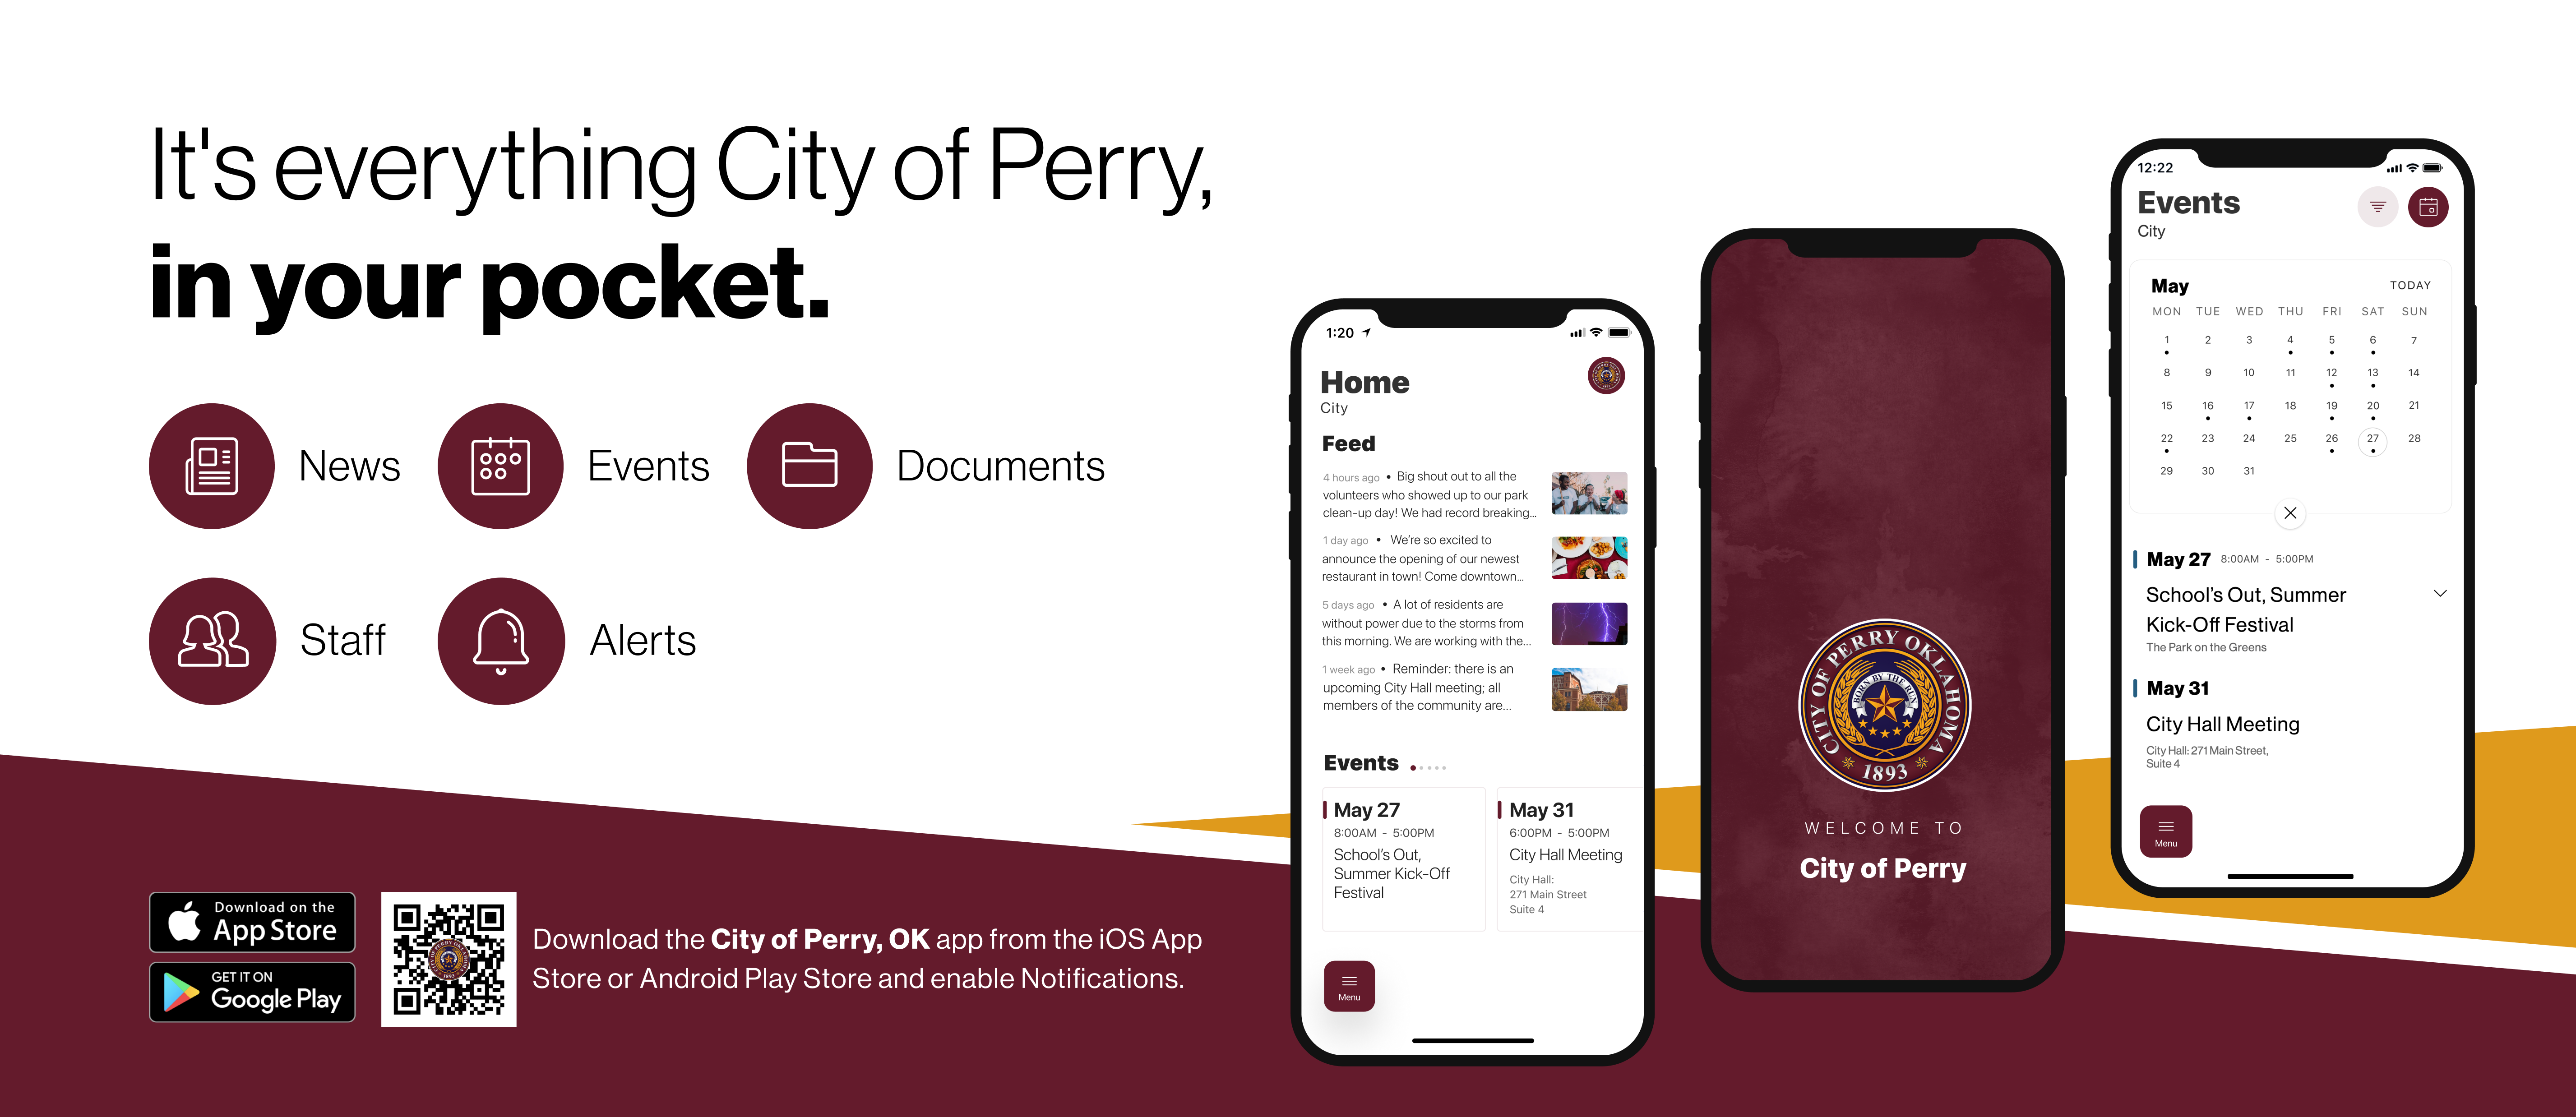 city of perry marketing material